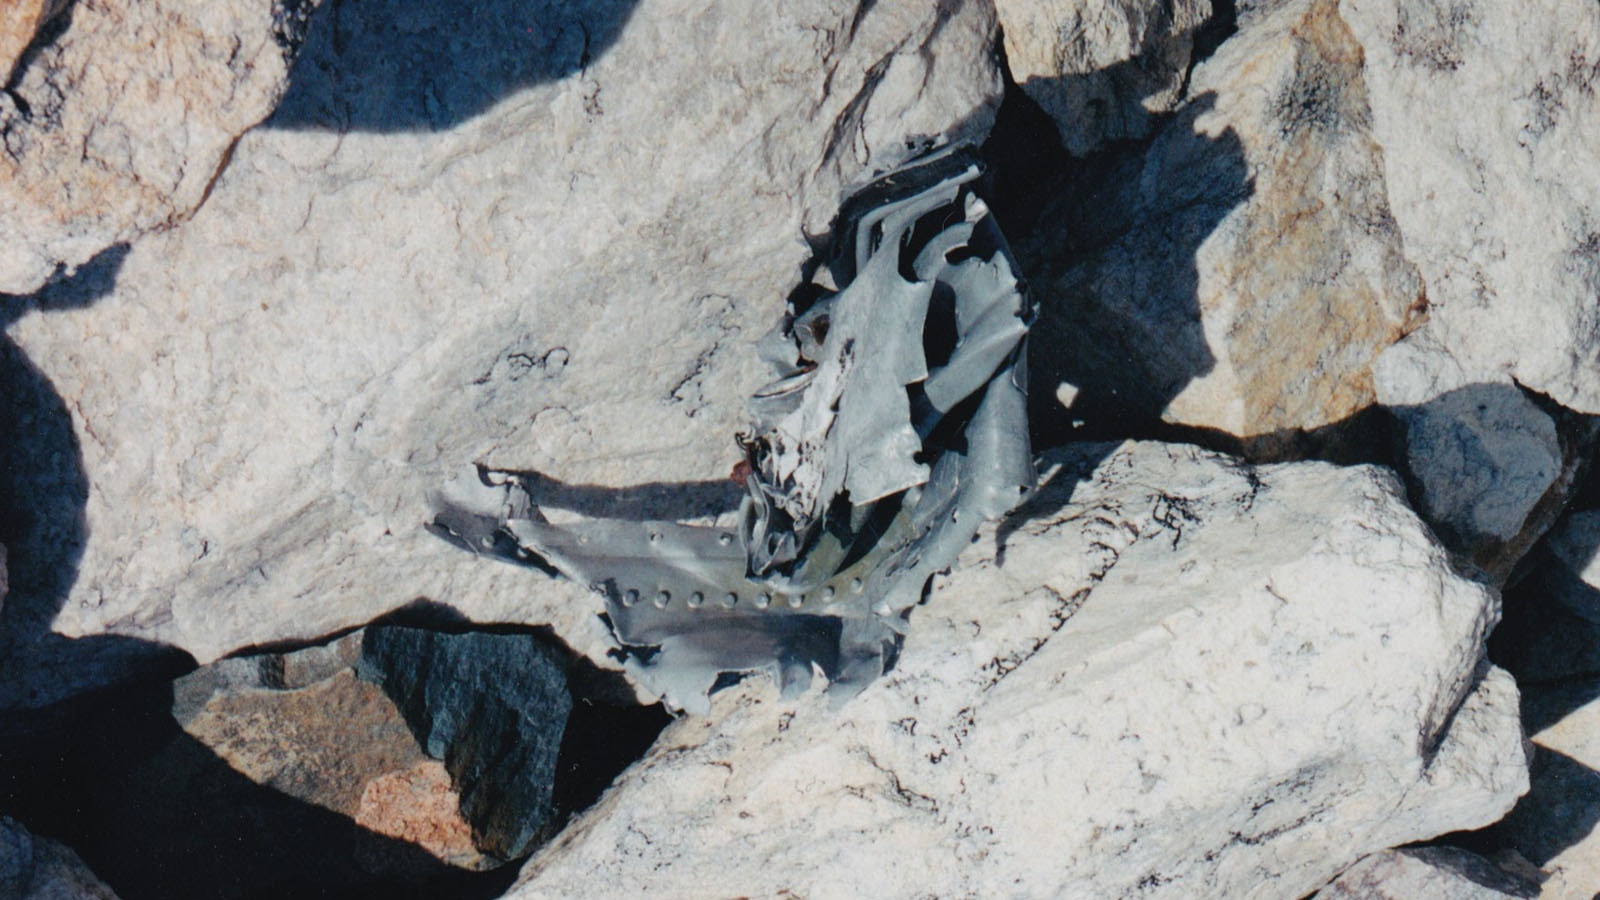 First responders to the United Air Lines Flight 409 crash site found a large debris field on Medicine Bow Mountain. Among the parts that were distinguishable were the airplane’s four engines.